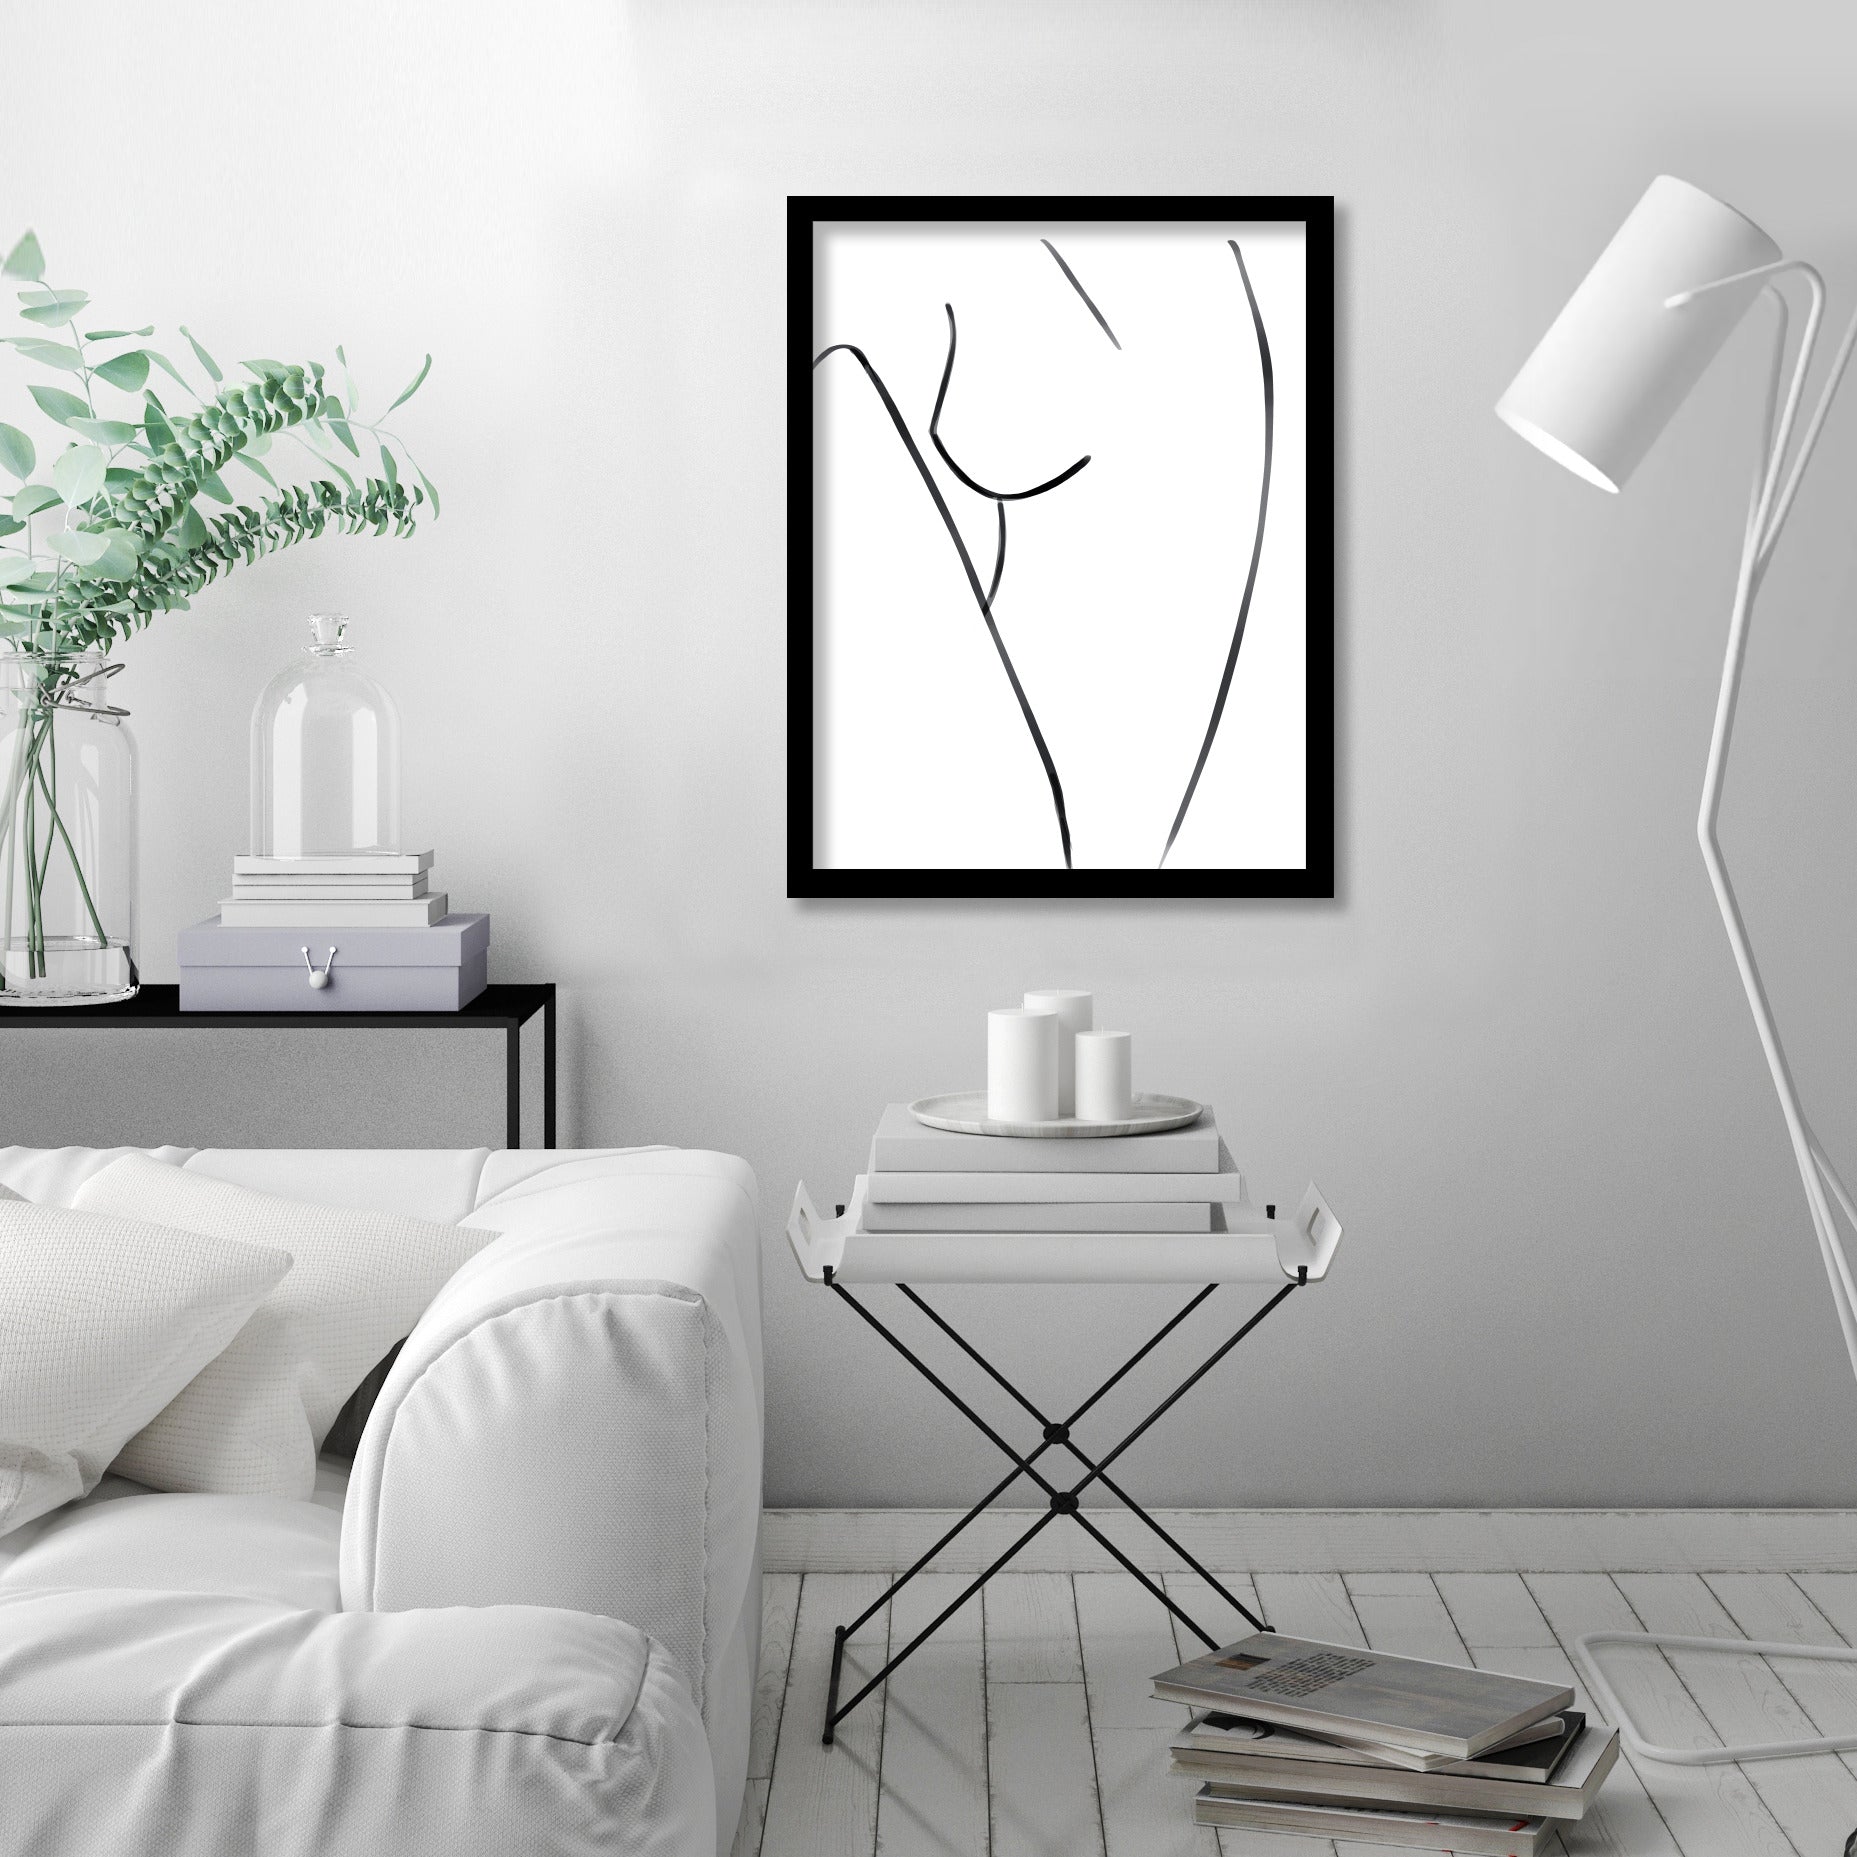 Nude Woman Line Art 004 by Thomas Succes - Canvas, Poster or Framed Print